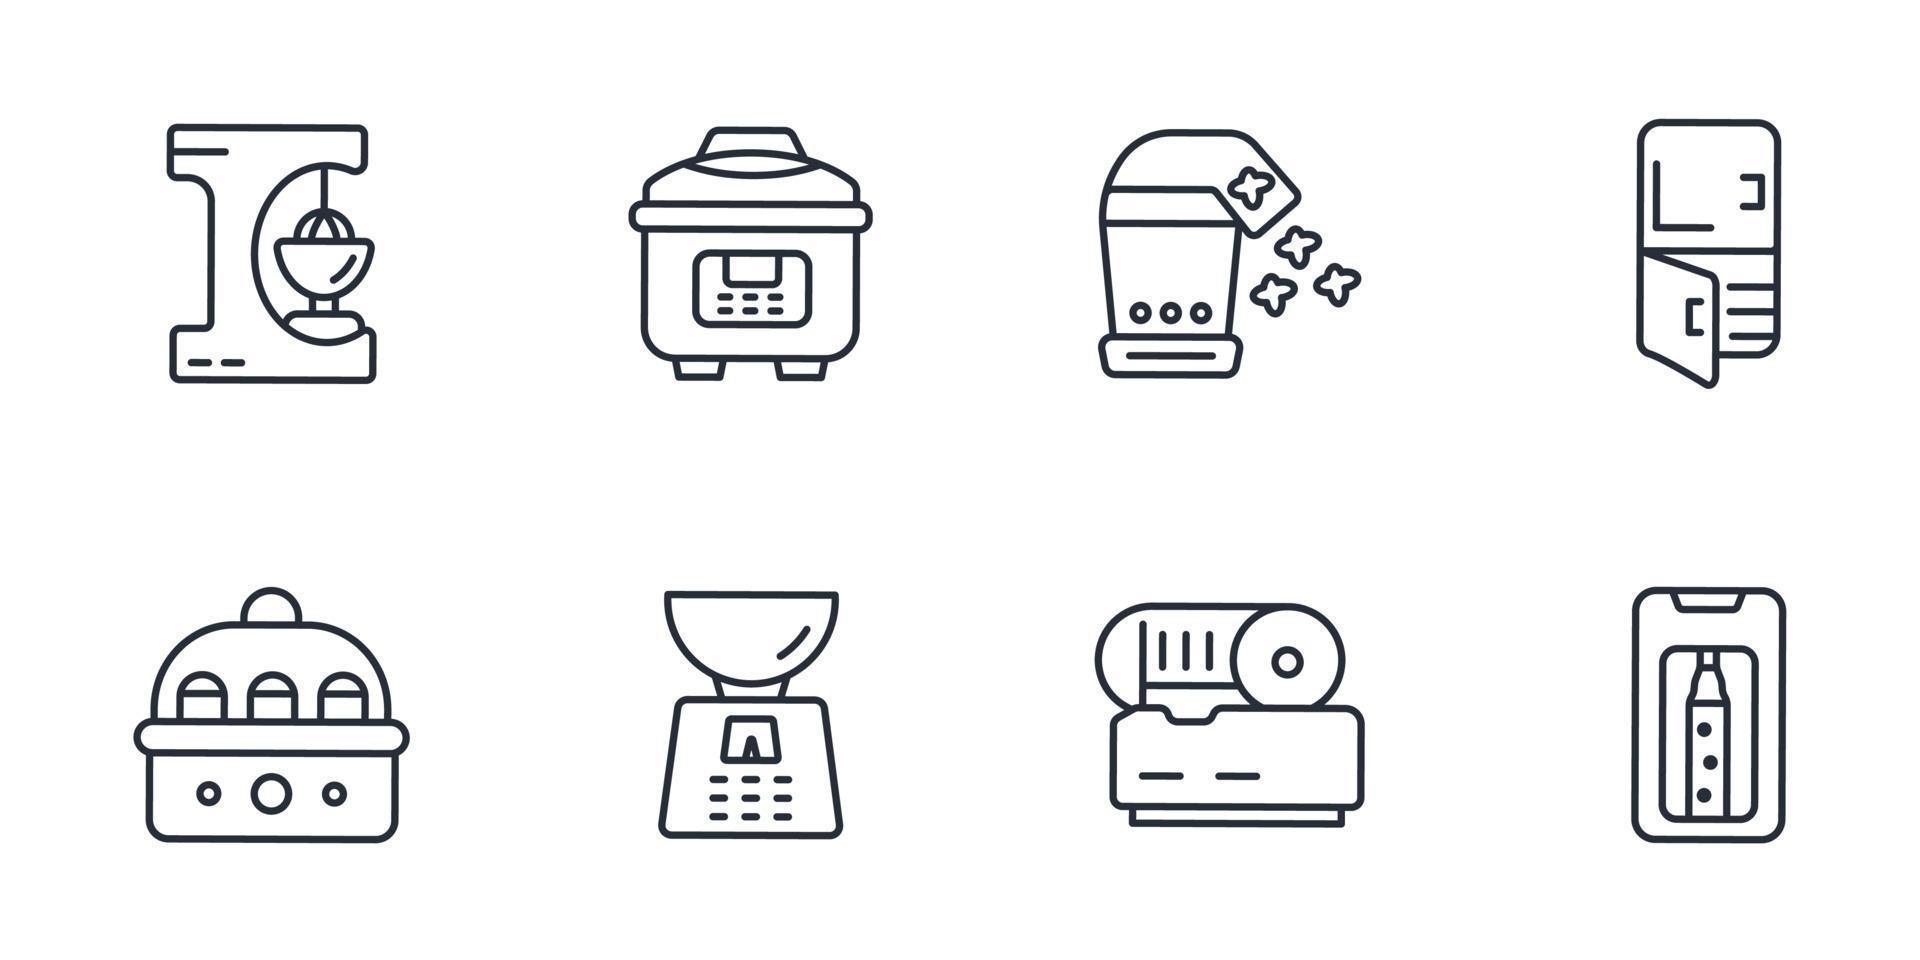 kitchen appliances icons  symbol vector elements for infographic web